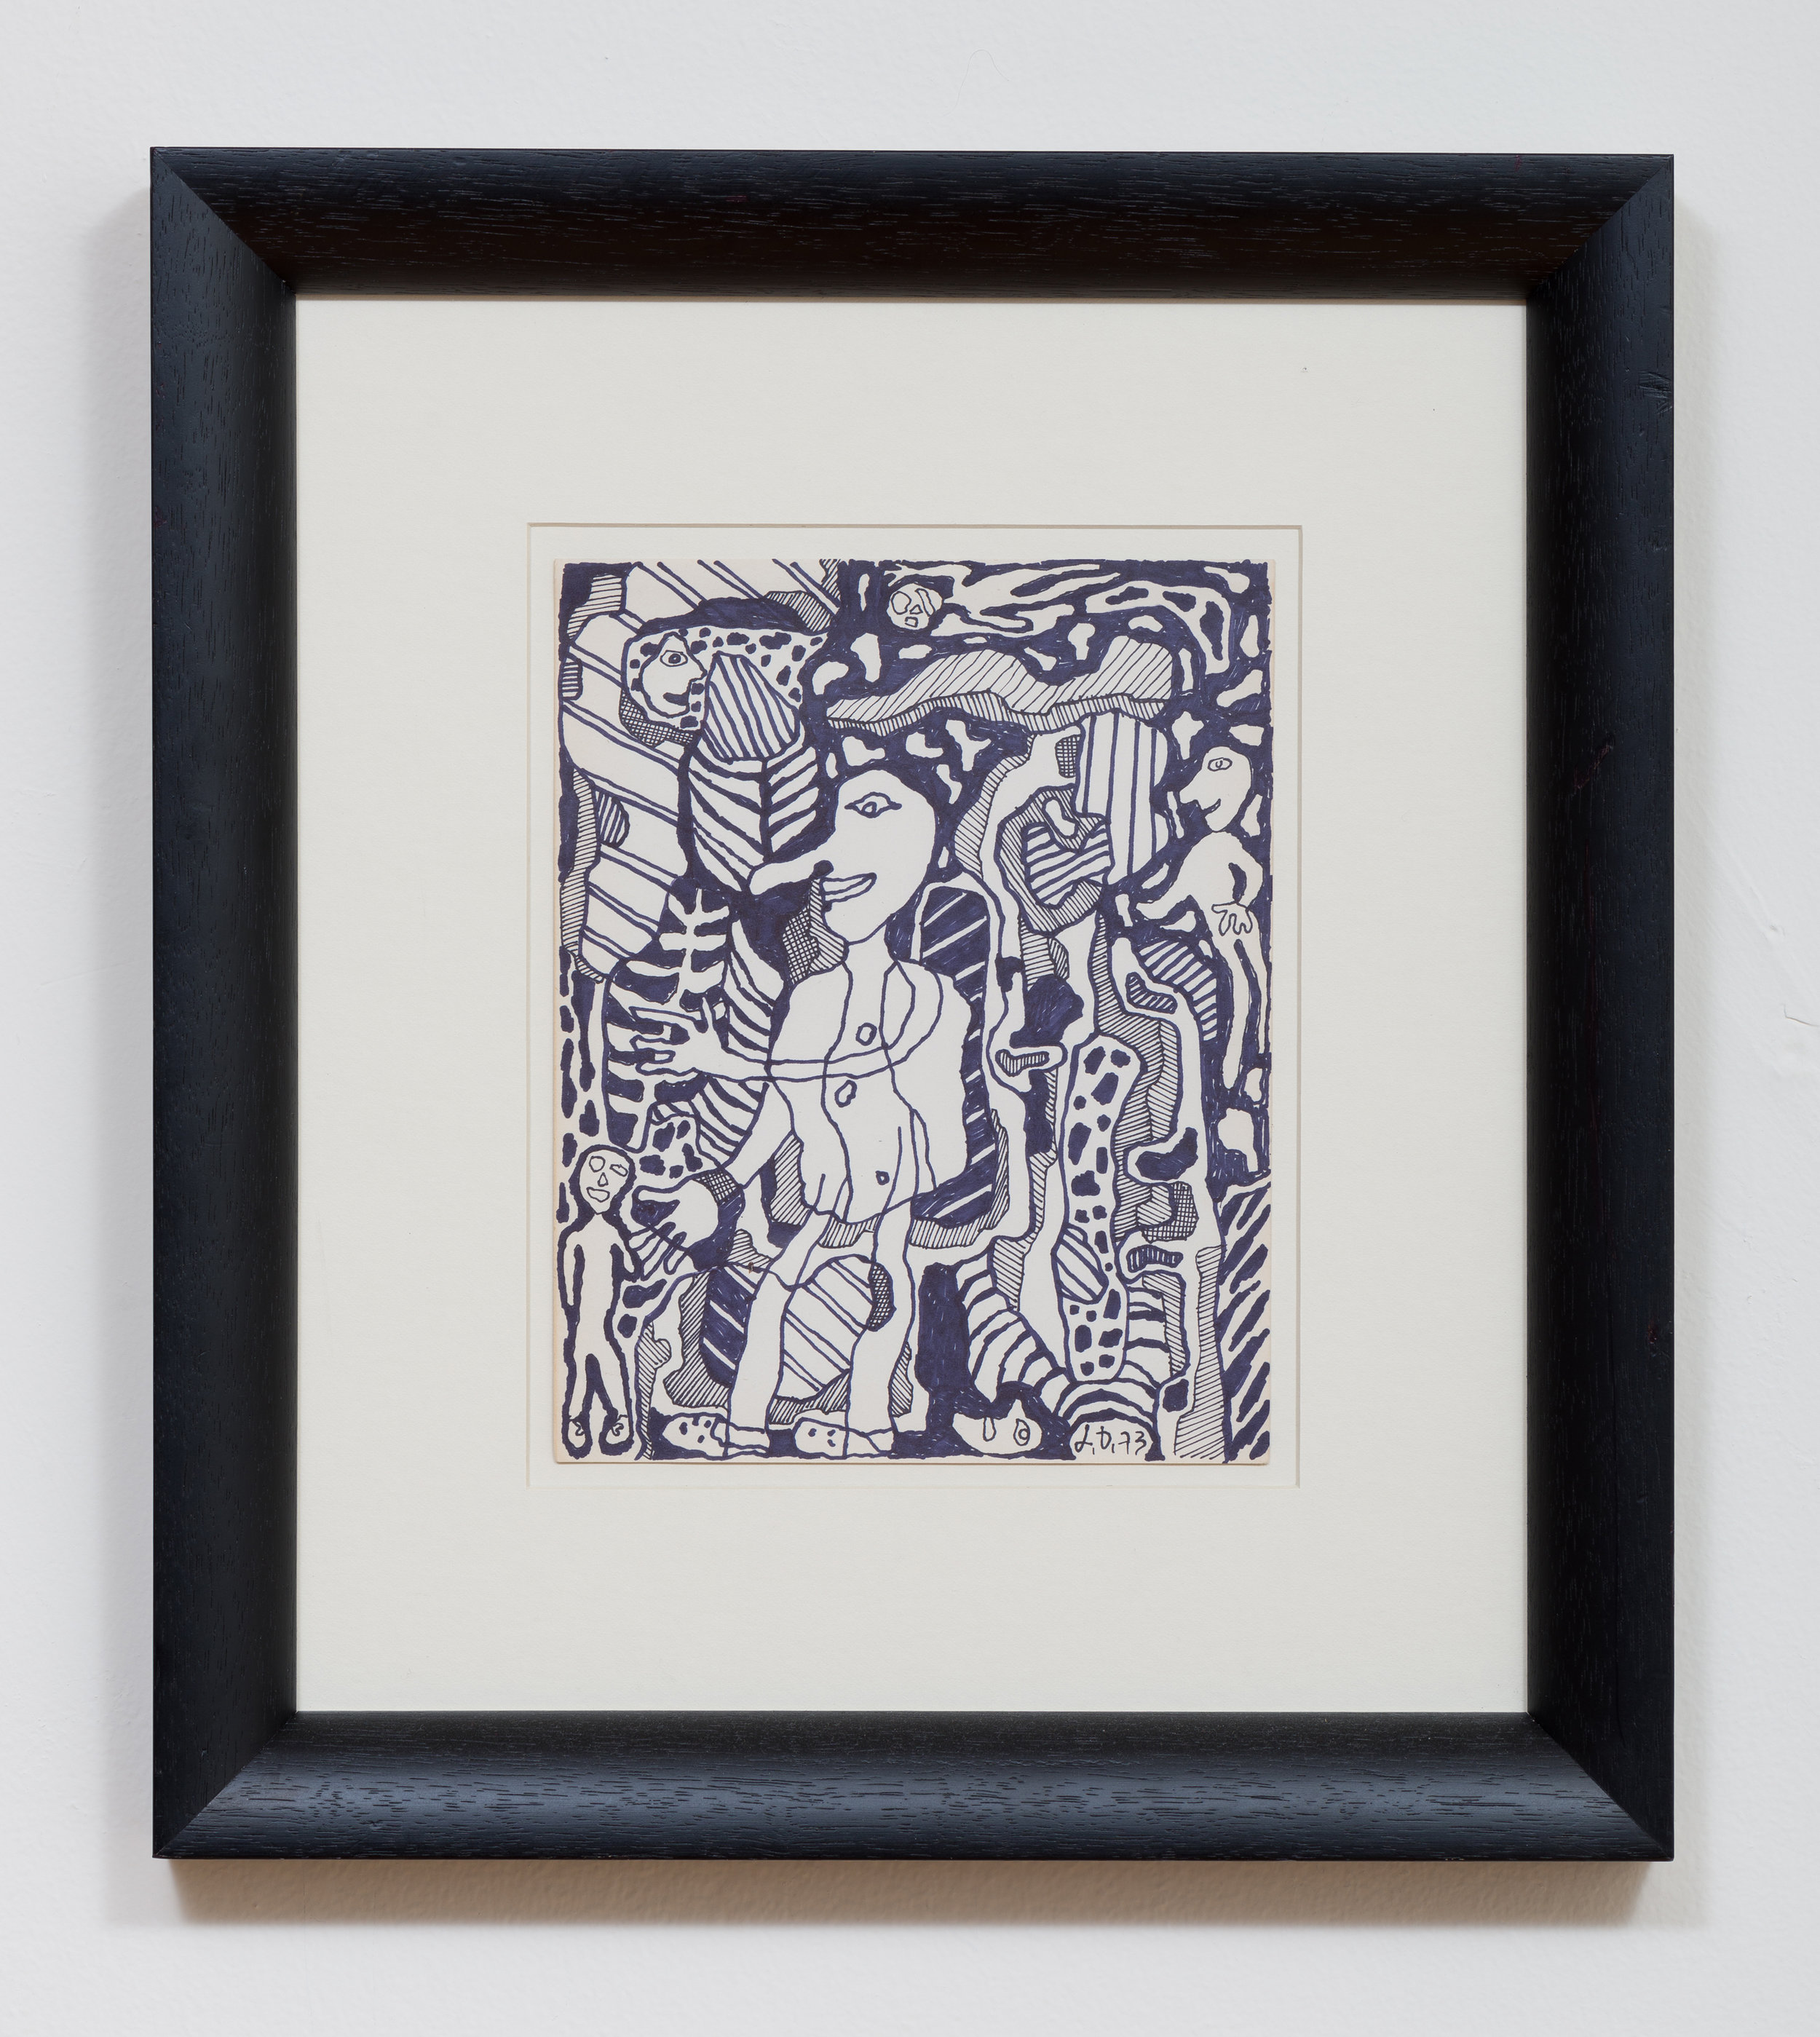   Jean Dubuffet    Untitled   1973 Ink on paper 9.75 x 7.75 inches paper, 18.25 x 16.25 inches framed 